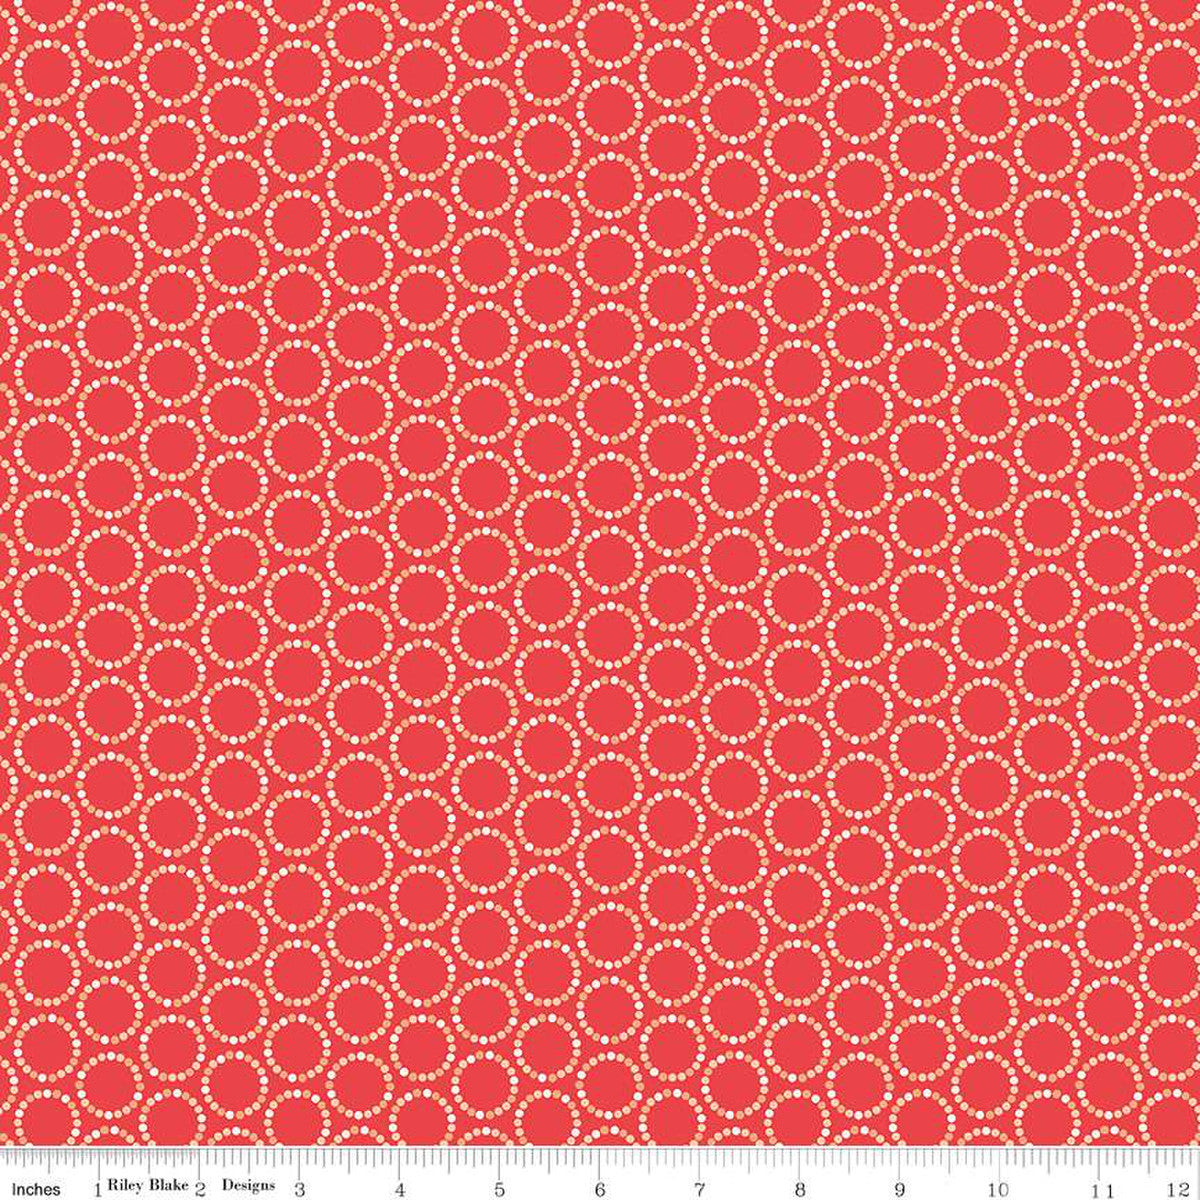 In From The Cold Circles Coral Yardage by Heather Peterson | Riley Blake Designs #C14866-CORAL